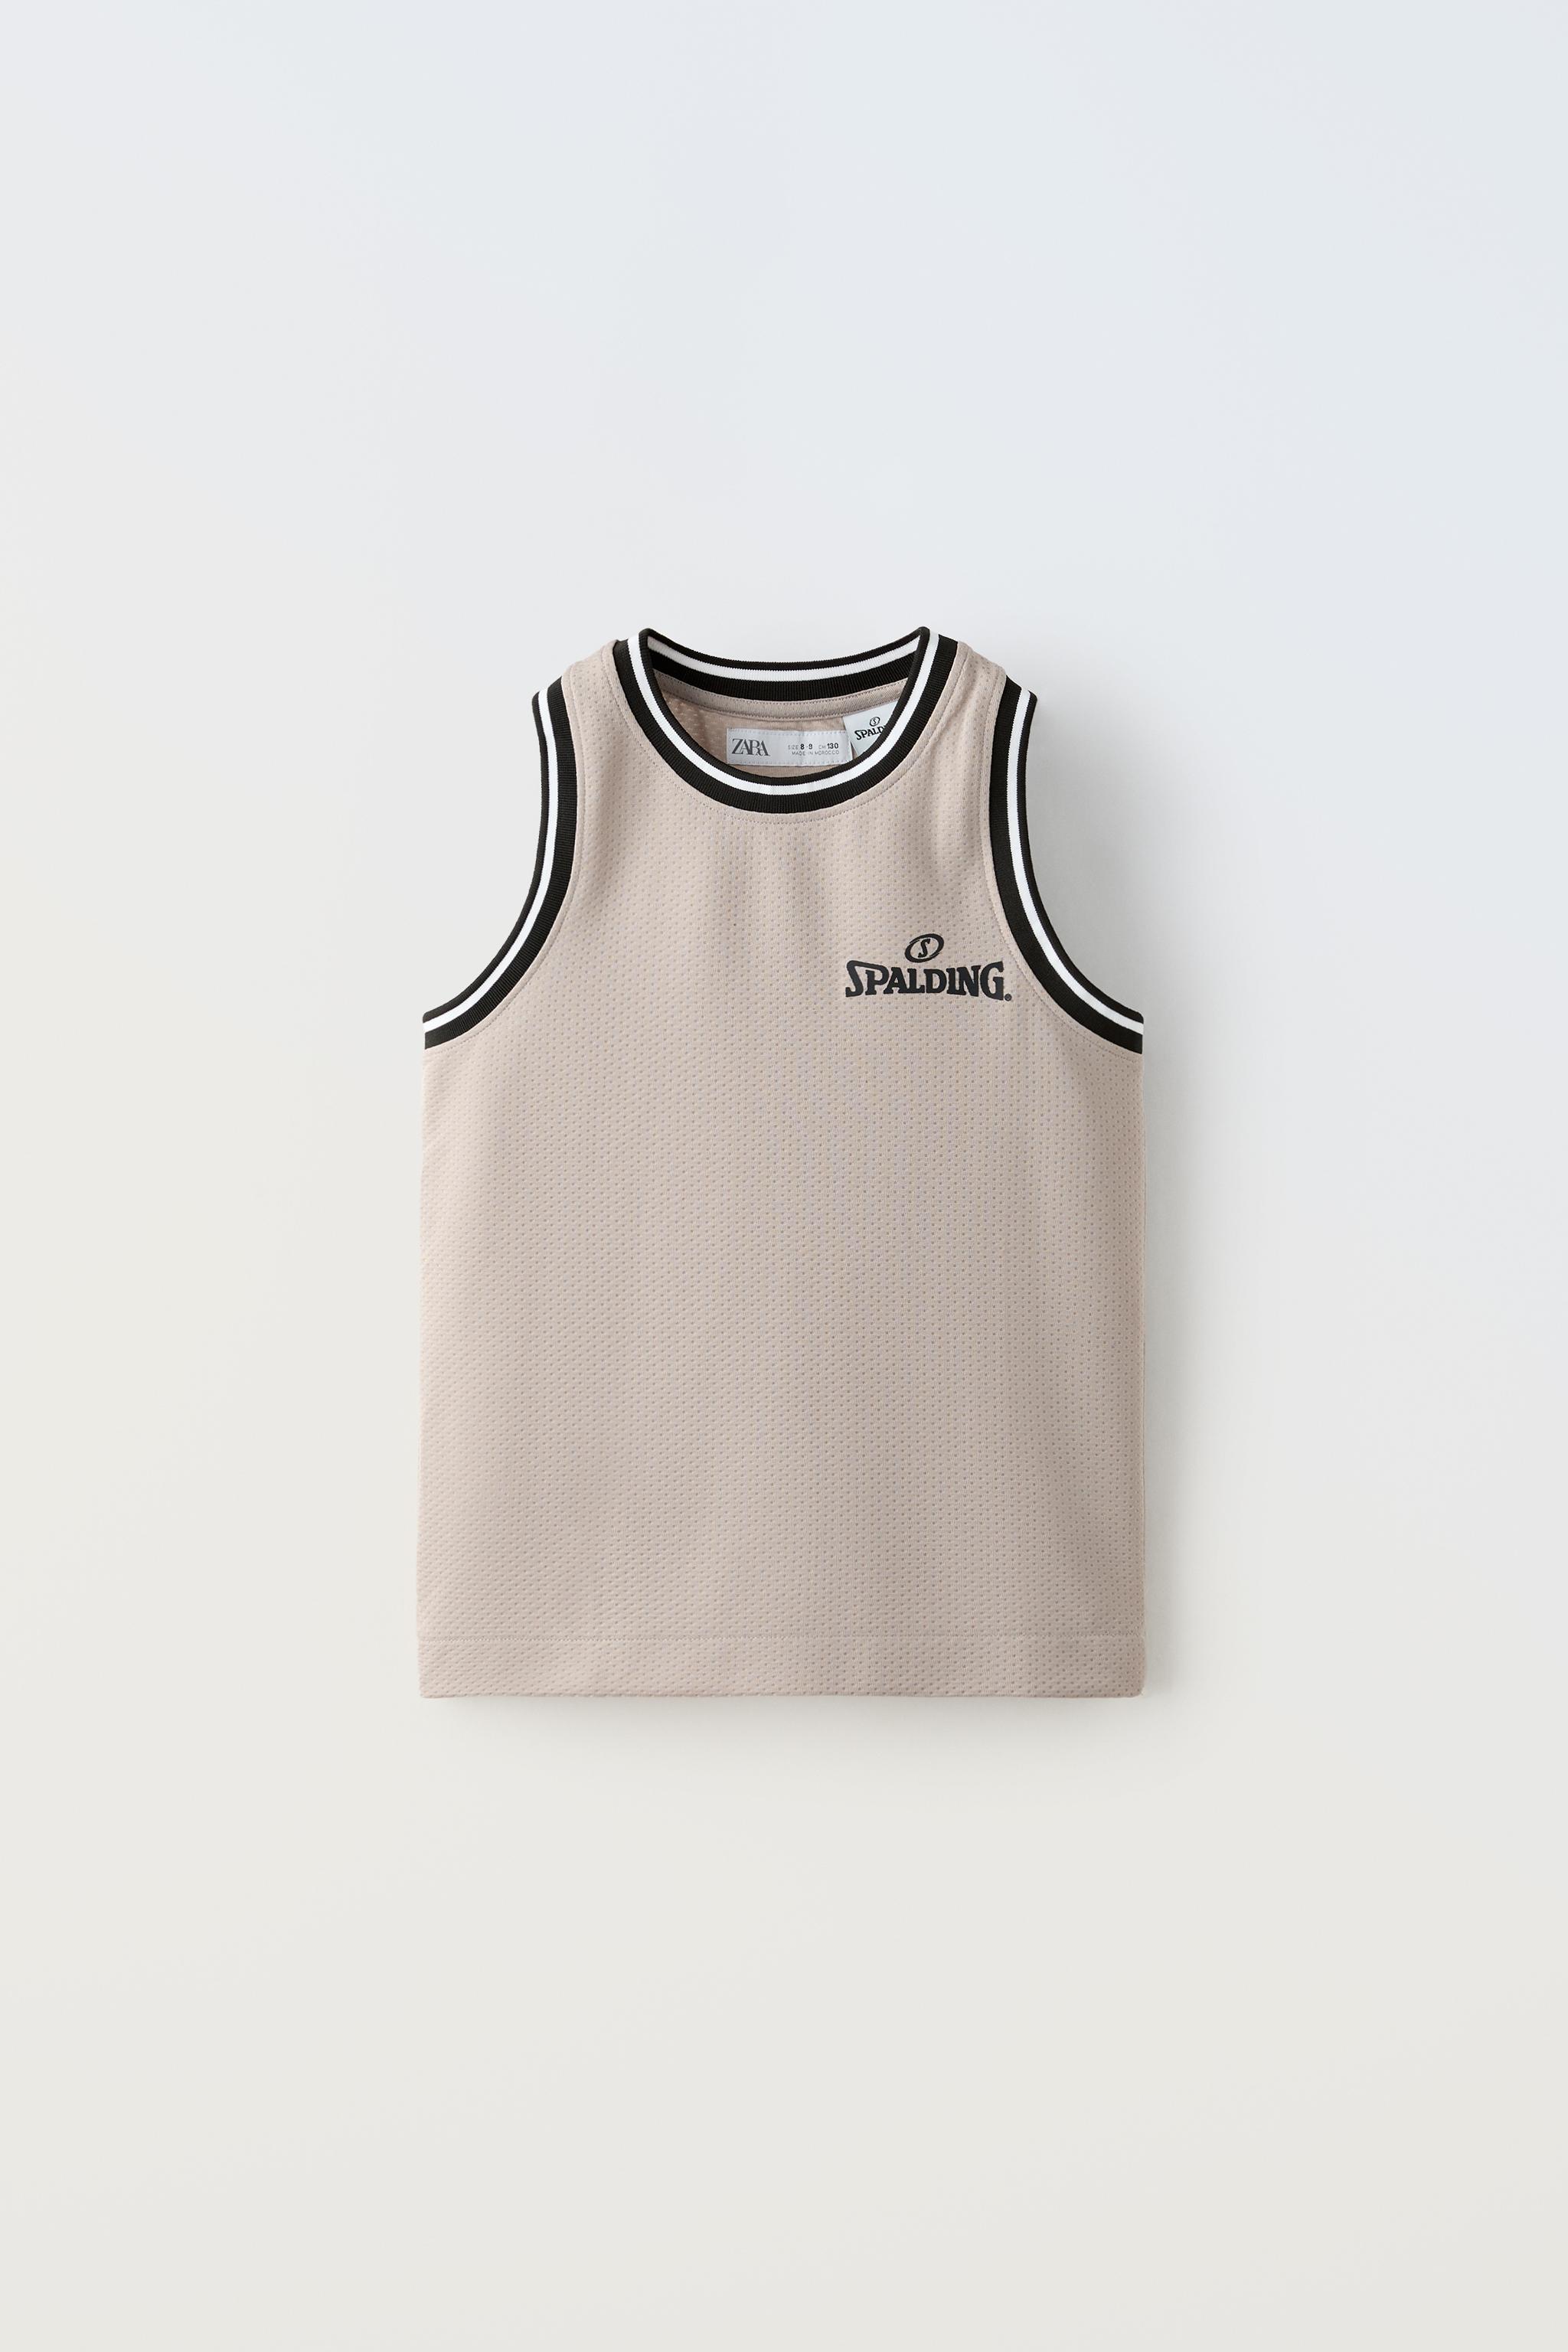 SPALDING ® PIPED TANK TOP